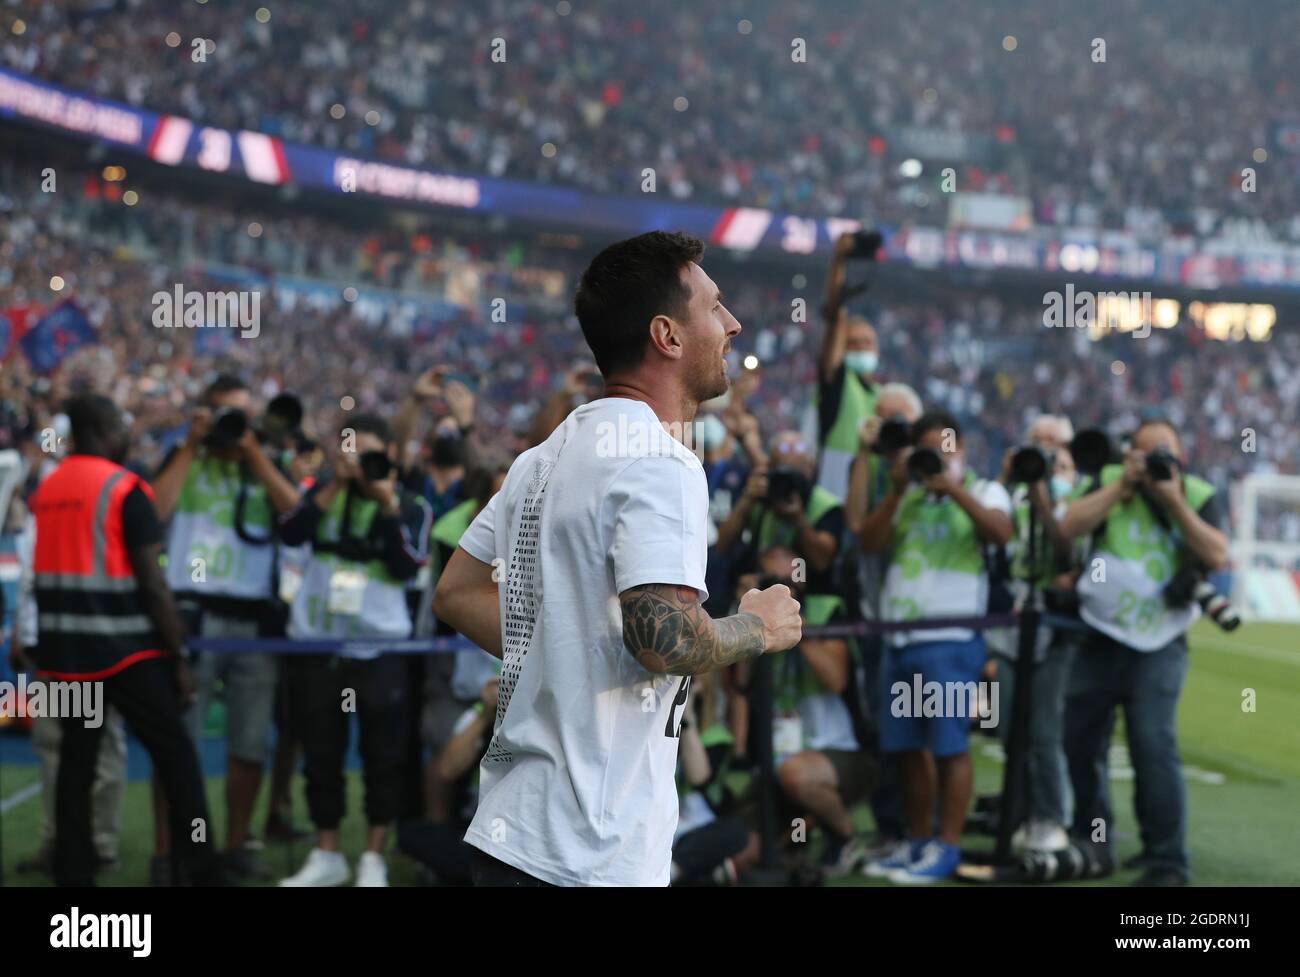 Paris, France. 14th Aug, 2021. Argentinian forward Lionel Messi attends the new recruits presentation ceremony prior to the French Ligue 1 football match between Paris Saint-Germain and Racing Club Strasbourg at the Parc des Princes stadium in Paris, France, Aug. 14, 2021. Credit: Gao Jing/Xinhua/Alamy Live News Stock Photo